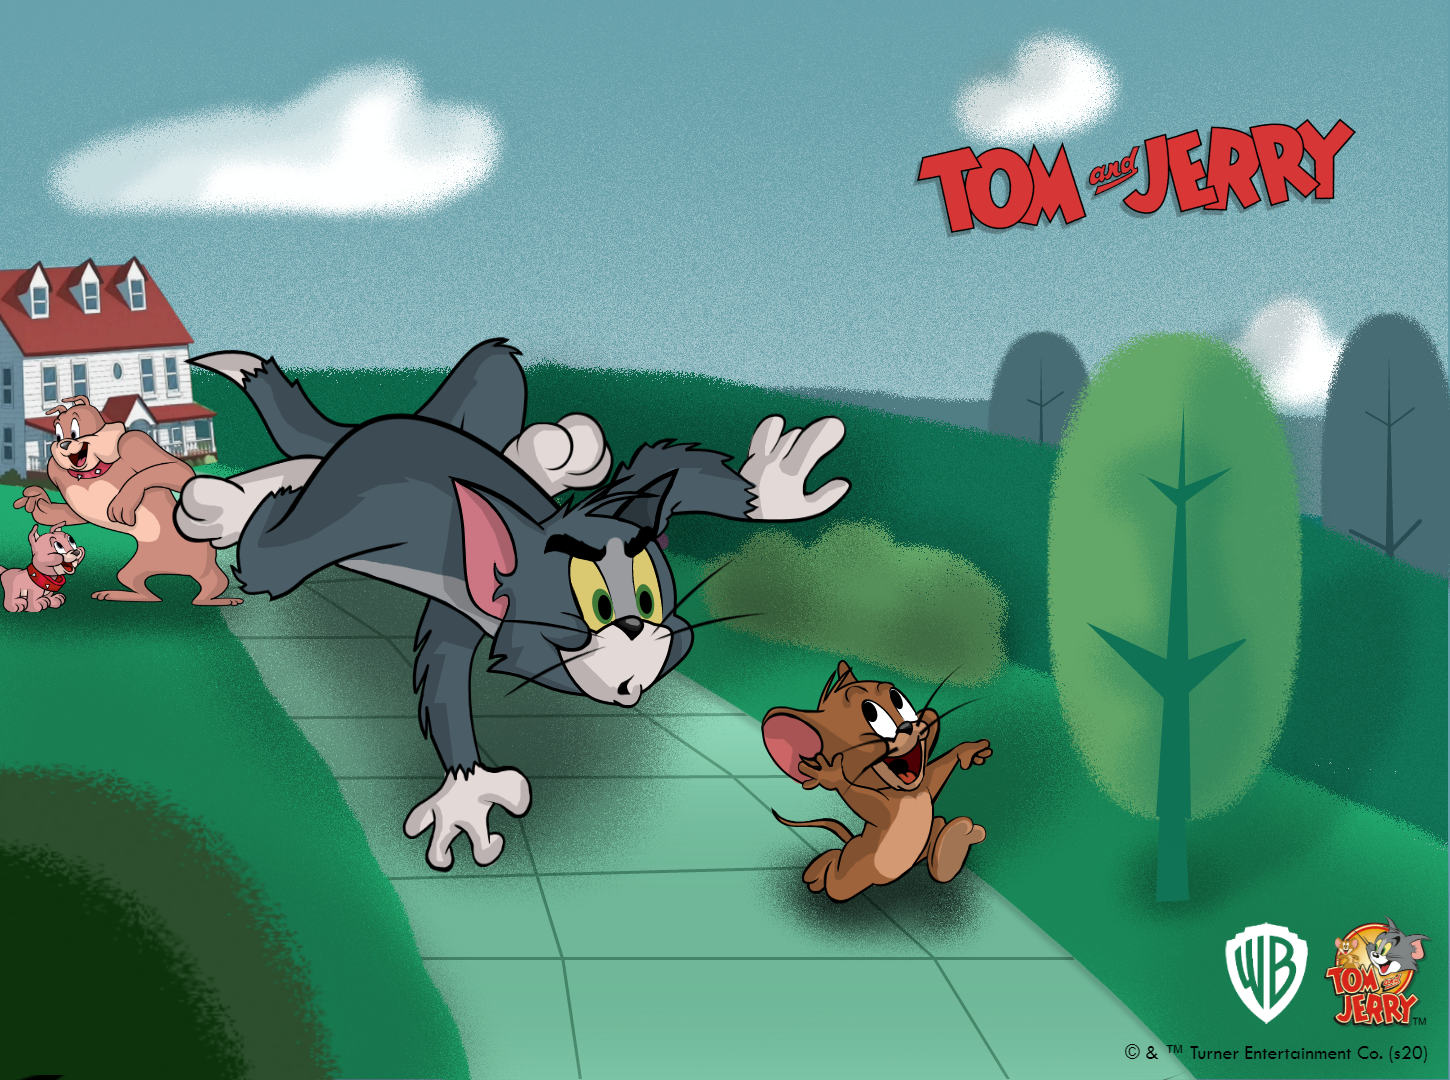 tom and jerry series full